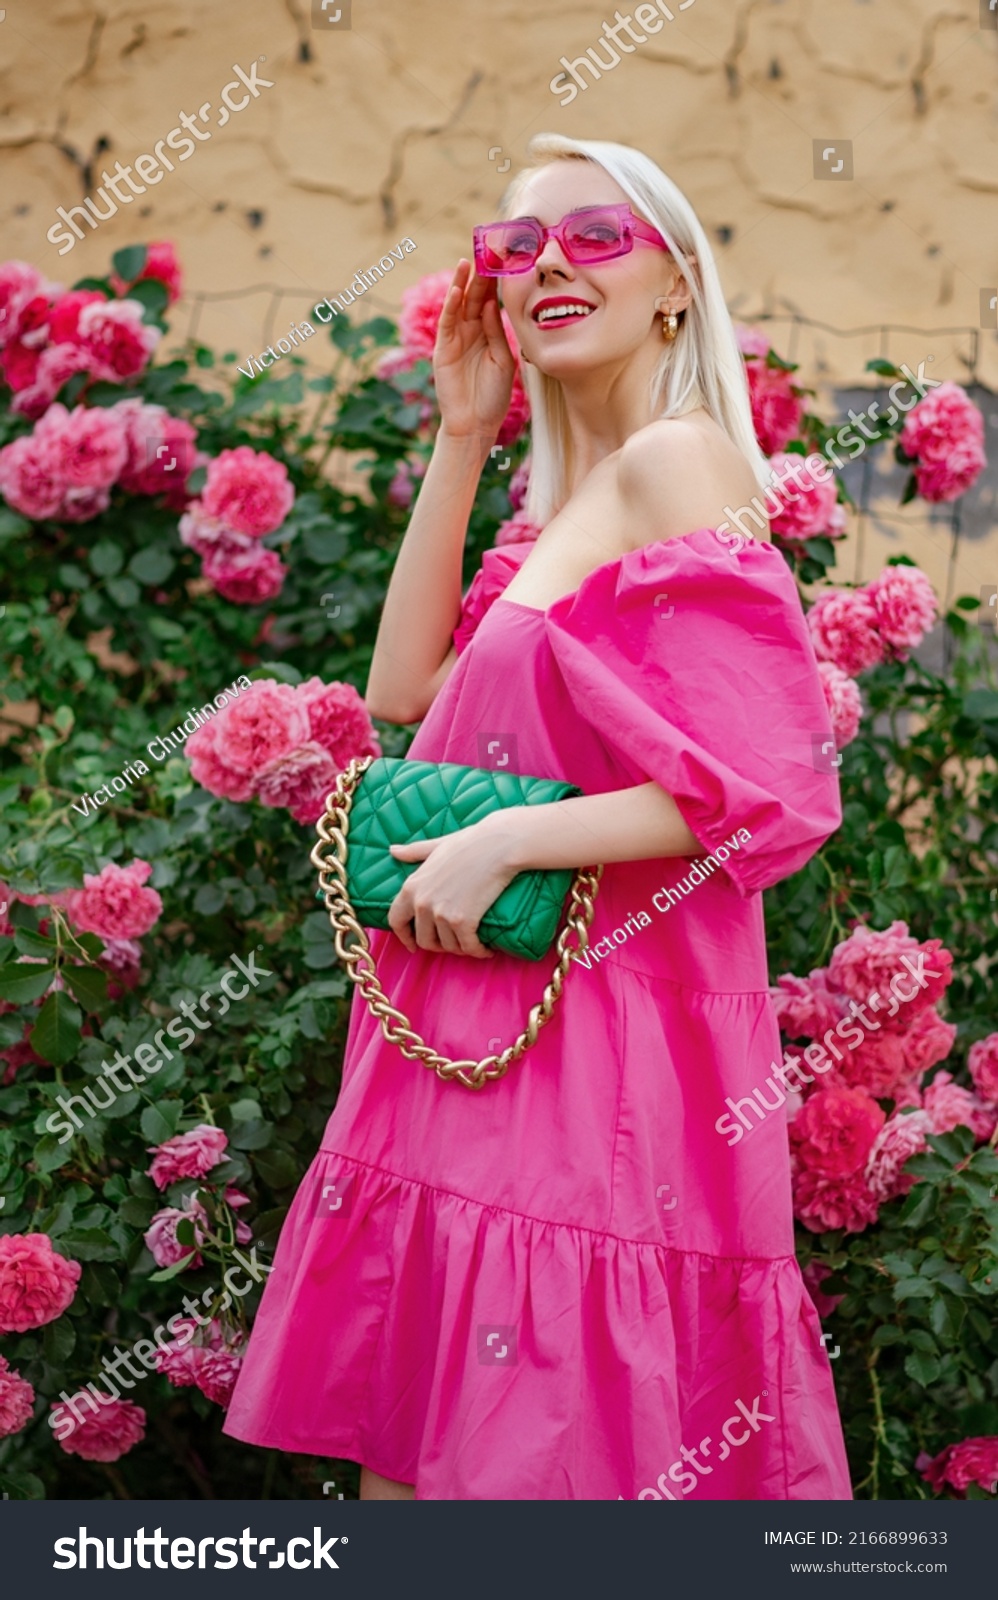 Happy smiling fashionable woman wearing trendy summer fuchsia color dress, pink sunglasses, holding stylish green faux leather bag, posing near blooming roses #2166899633